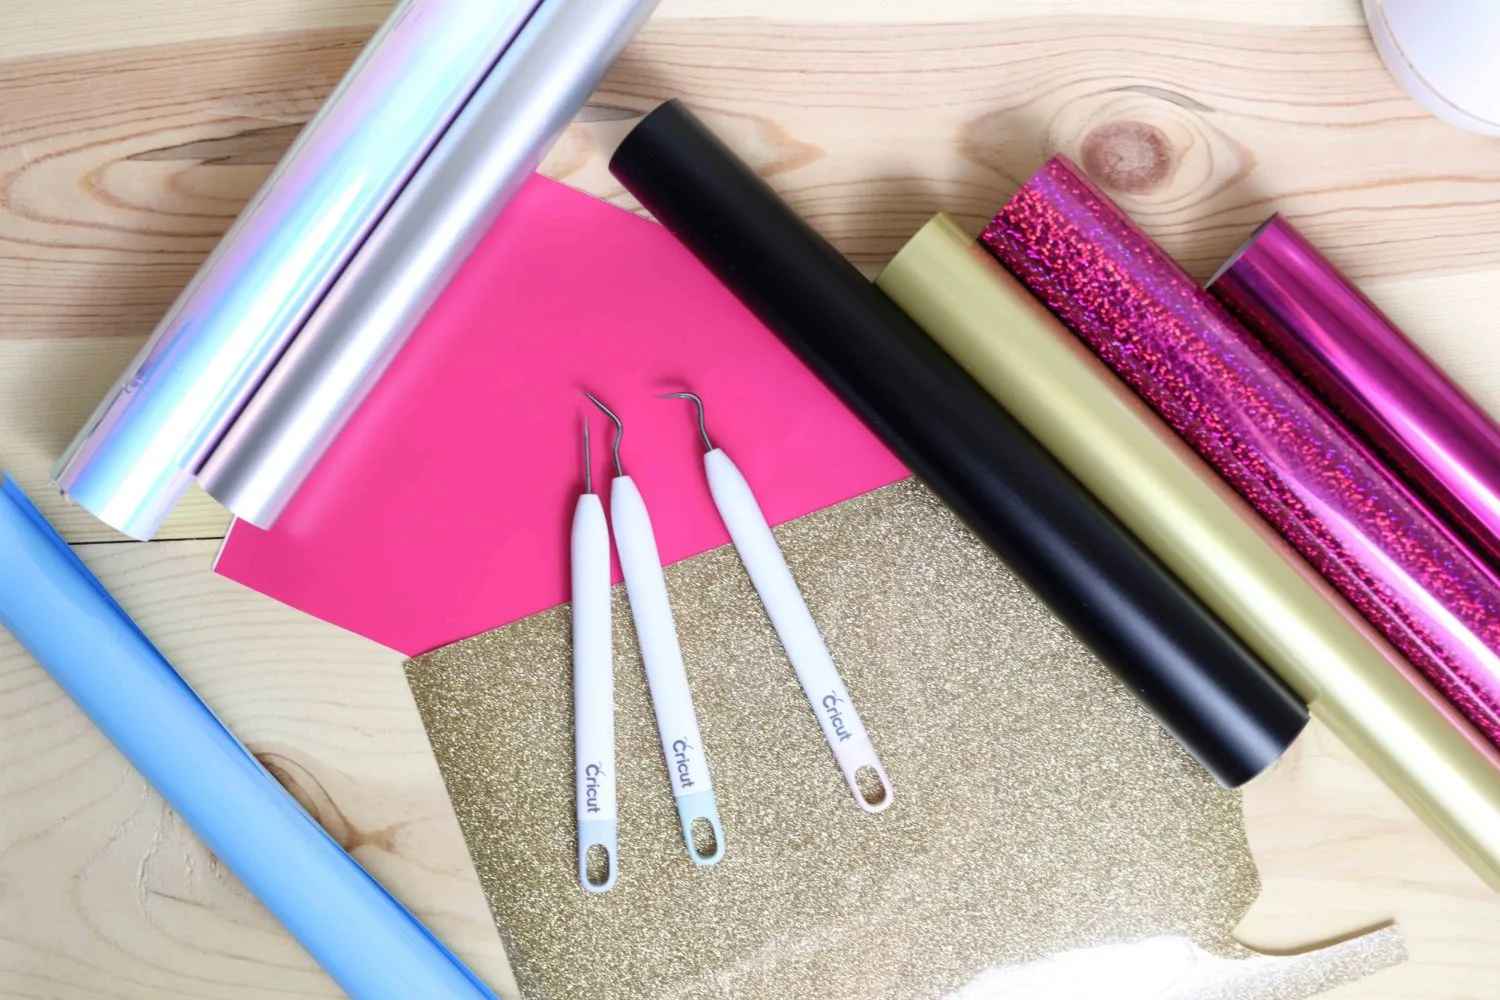 Types of Vinyl for Cricut: The Best Complete Guide to Craft Vinyl